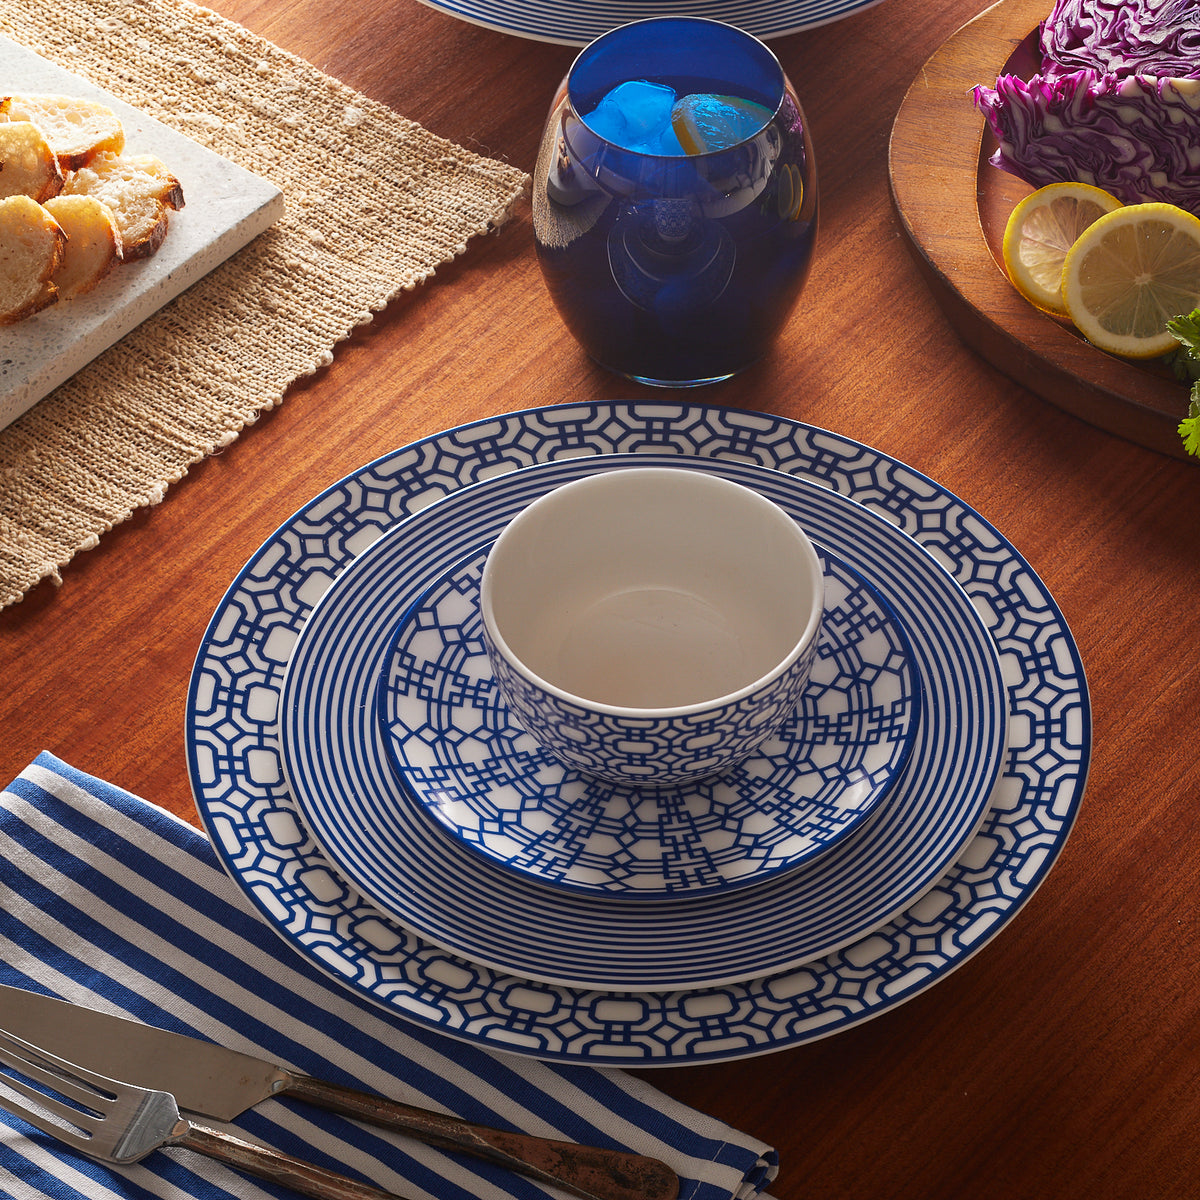 A table setting with blue and white patterned plates, a high-fired porcelain Newport Stripe Rimmed Salad Plate by Caskata Artisanal Home, a bowl, blue glass, cutlery on a Newport Stripe napkin, and a plate of bread. Purple cabbage with lemon slices is seen in the background.